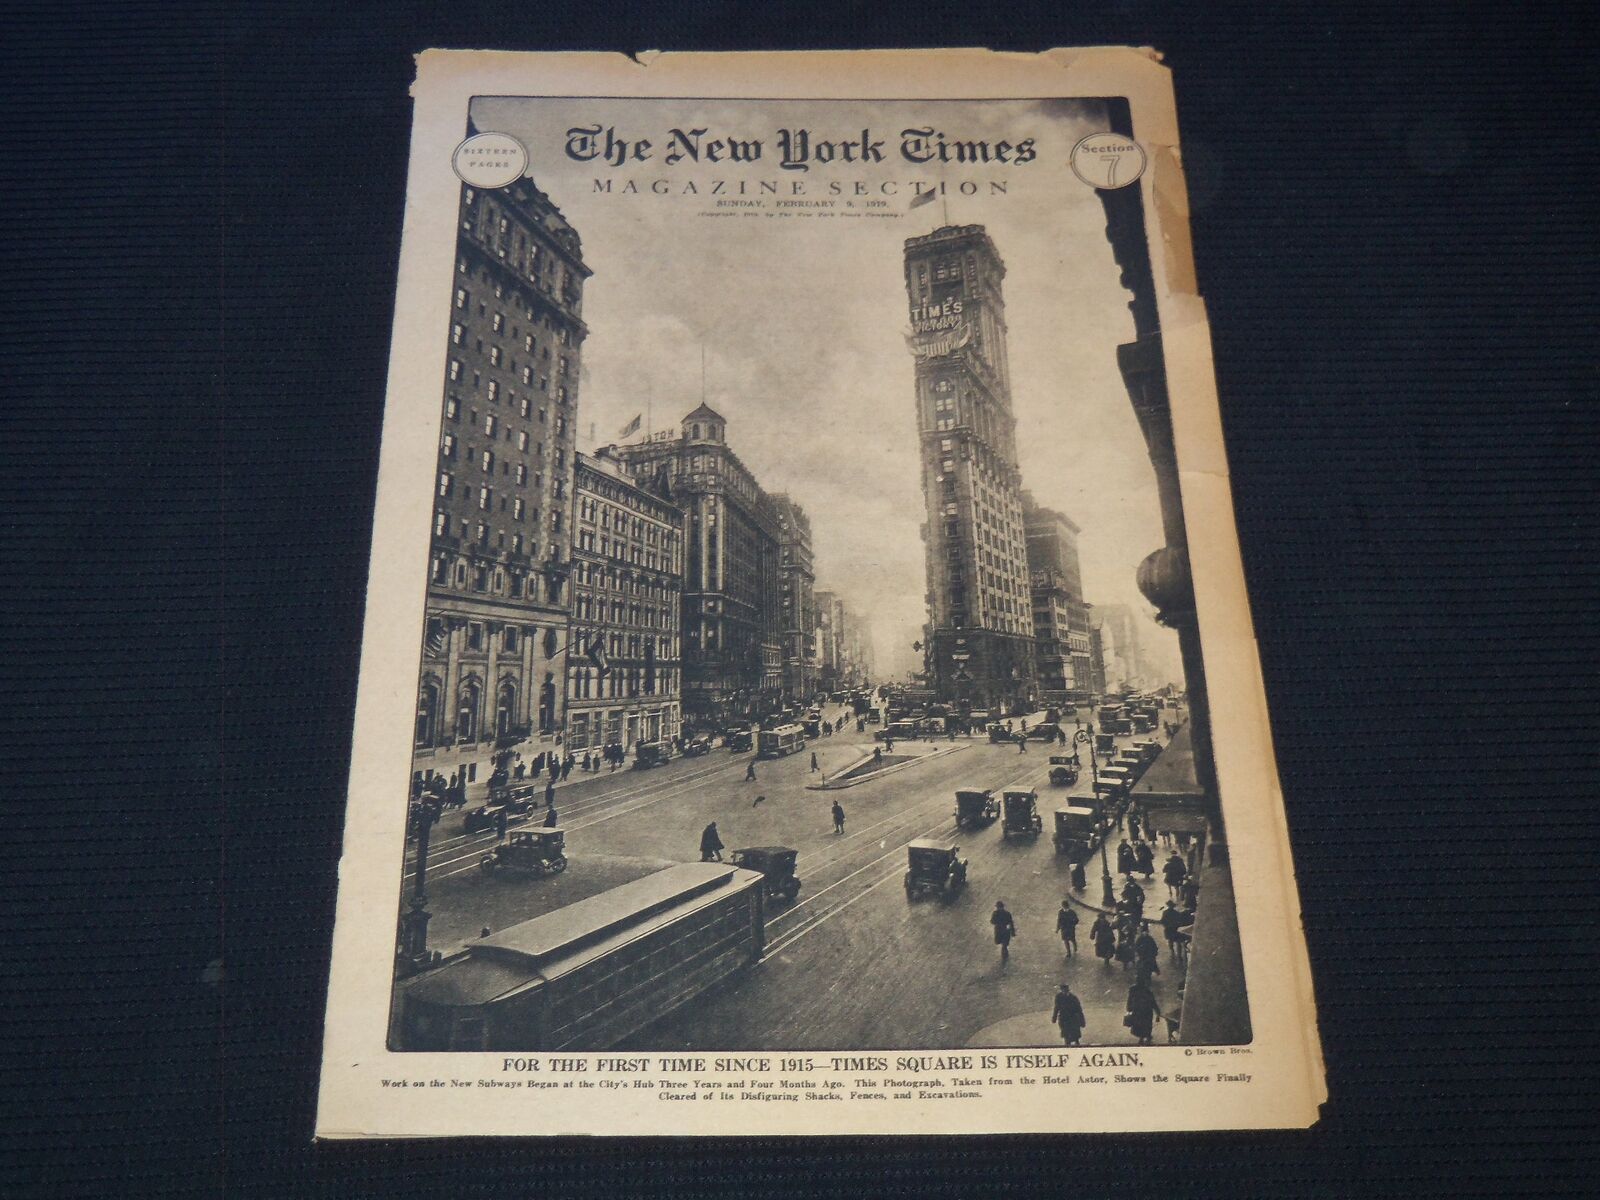 1919 FEBRUARY 9 NEW YORK TIMES MAGAZINE SECTION - TIMES SQUARE - NP 5830